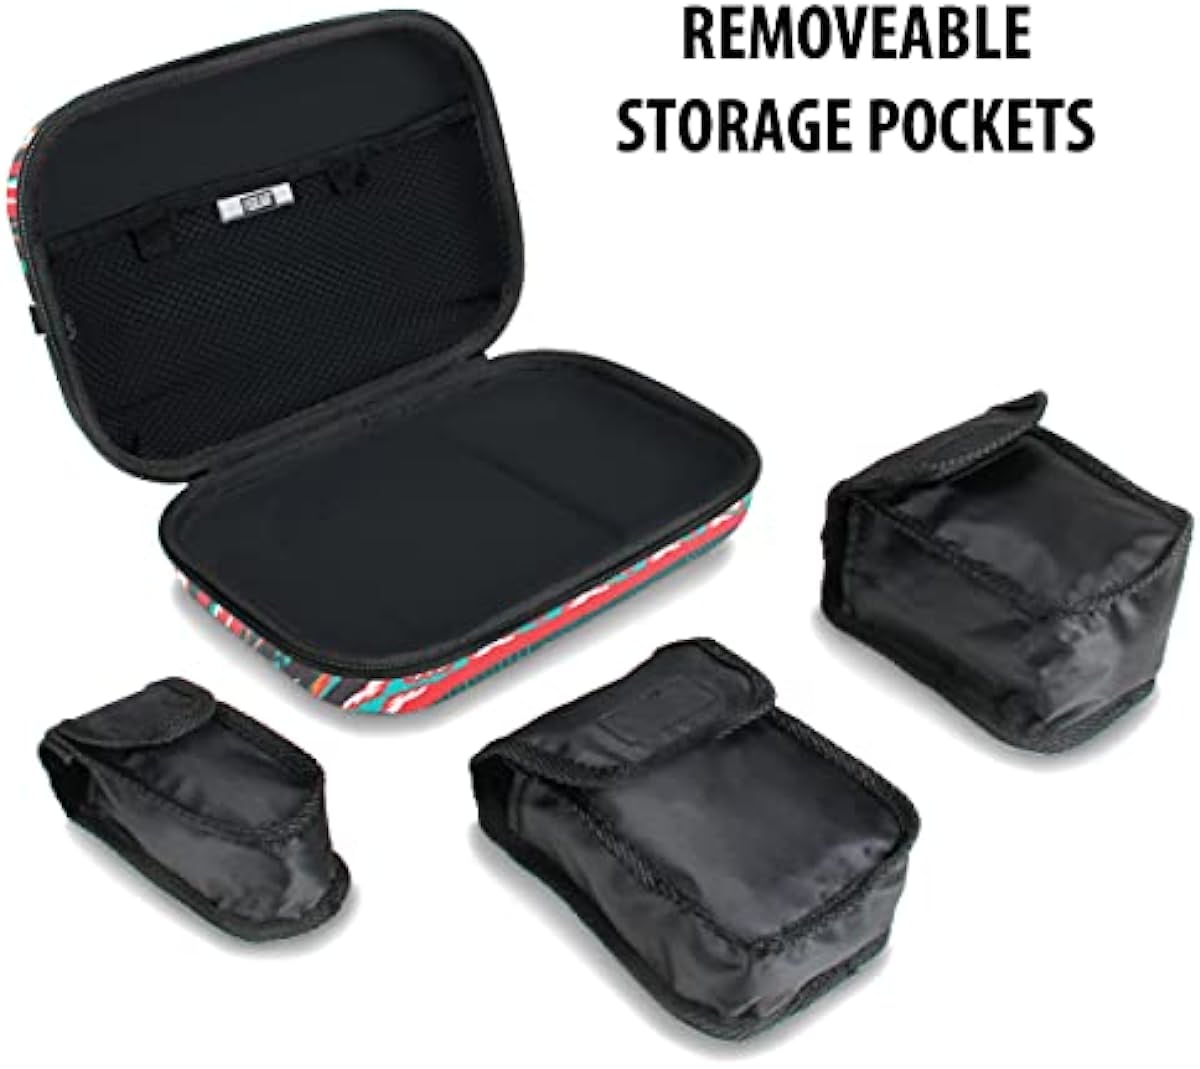 USA GEAR Diabetic Bag - Diabetic Travel Bag Insulin Kit with 3 Removable Pouches & Hard Shell Exterior - Compatible with Bayer Contour, TRUEtest, and More Glucose Monitors - Southwest